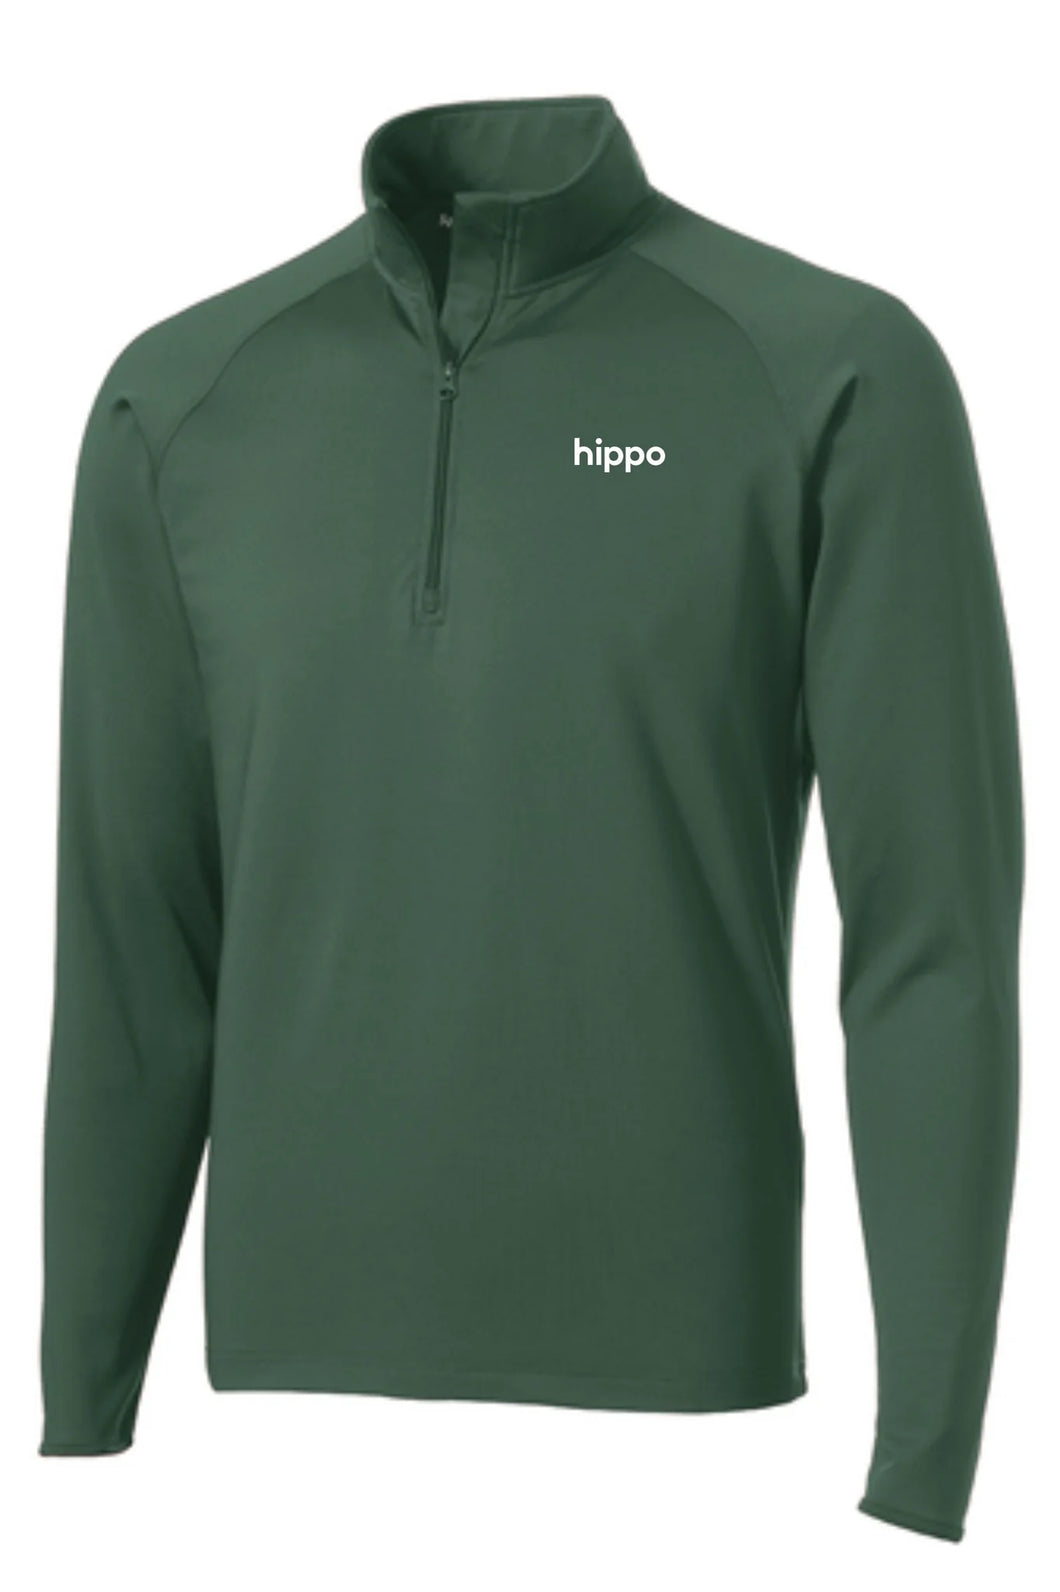 Hippo's Forest Green Anniversary 1/2-Zip Pullover (MUST RECEIVE CODE)